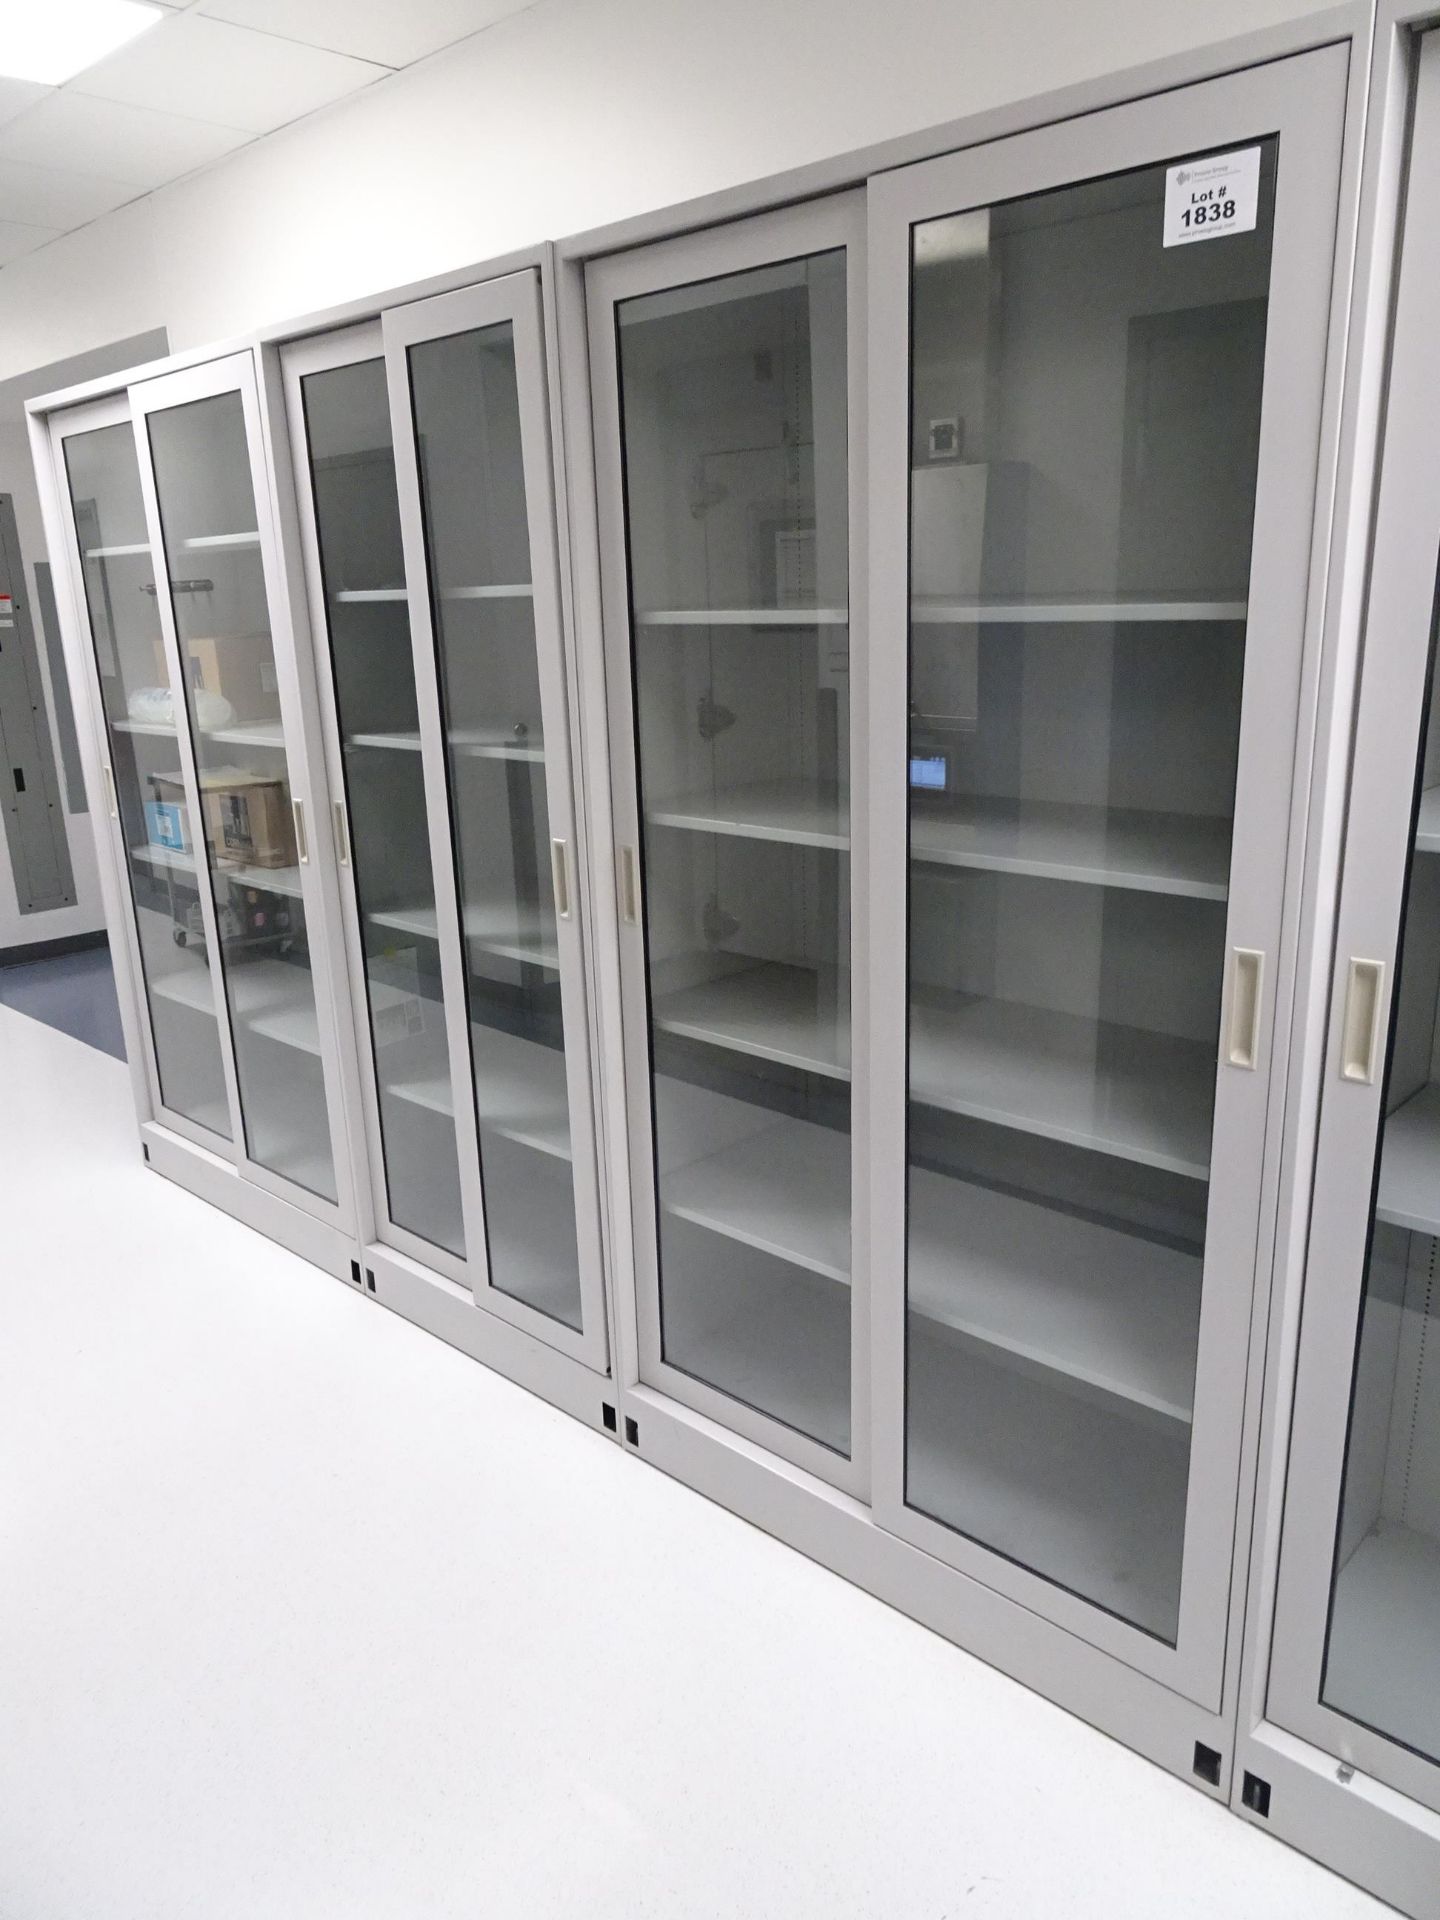 3-Section of storage Cabinets